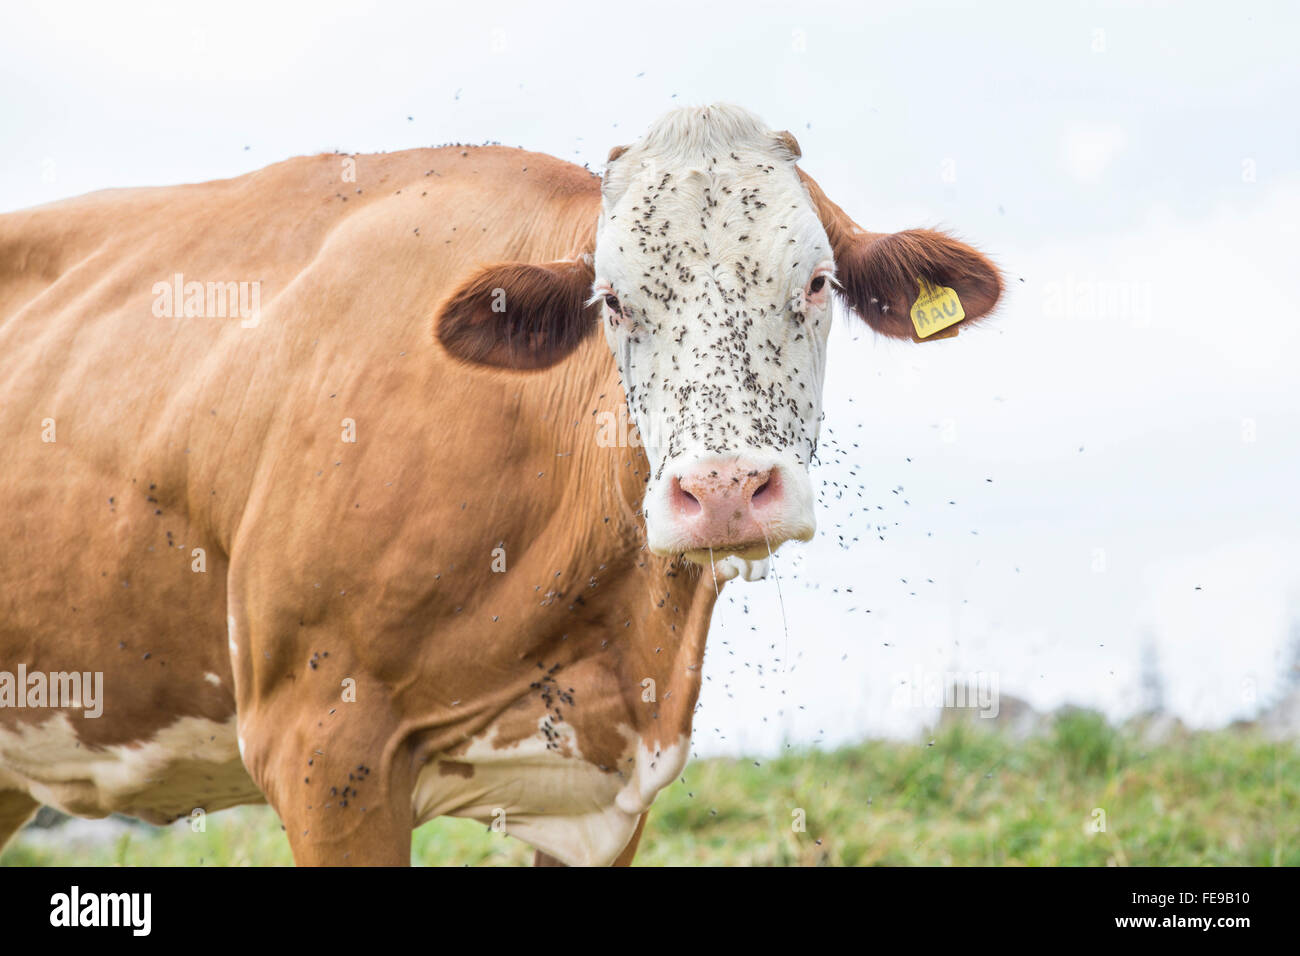 Huge cow with the face covered by flies looking at camera Stock Photo